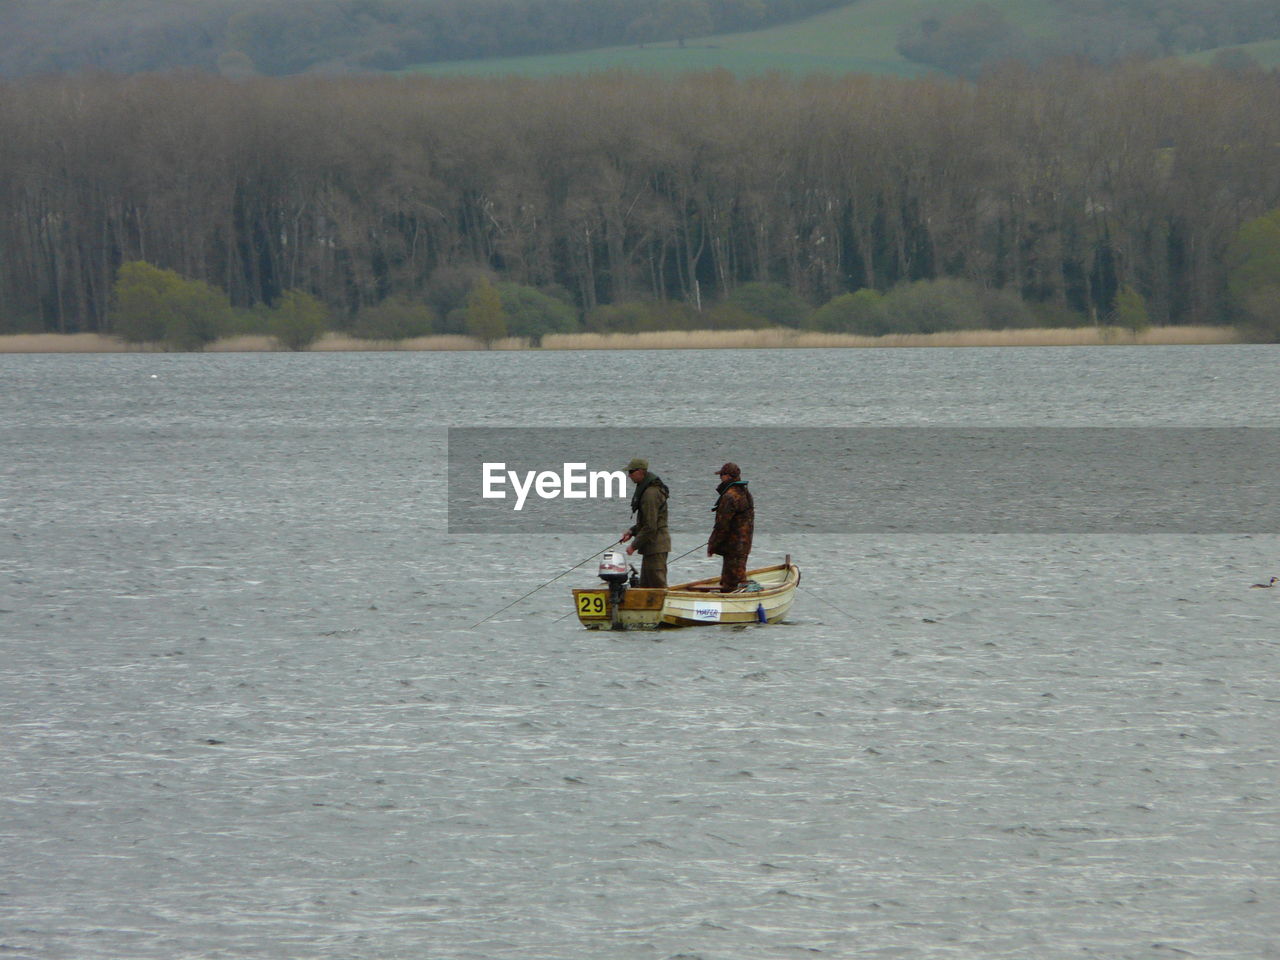 People fishing while standing on boat in lake